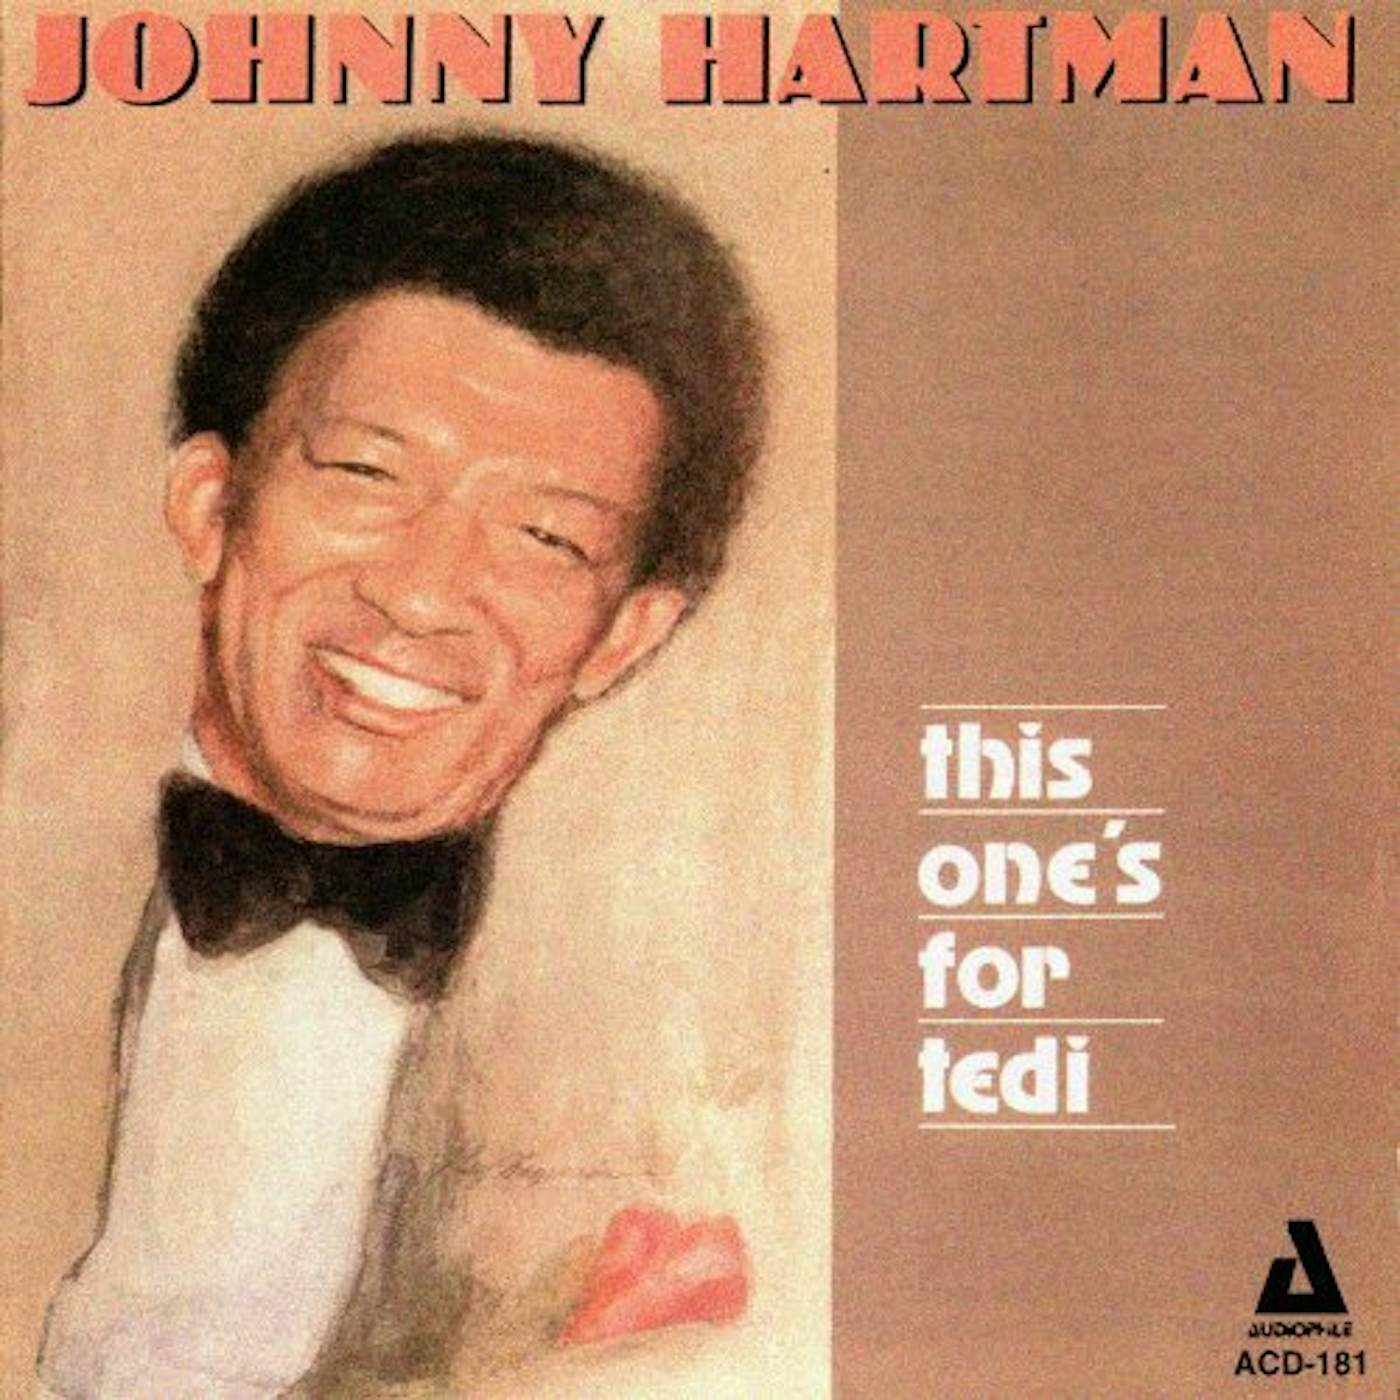 Johnny Hartman THIS ONE'S FOR TEDI CD